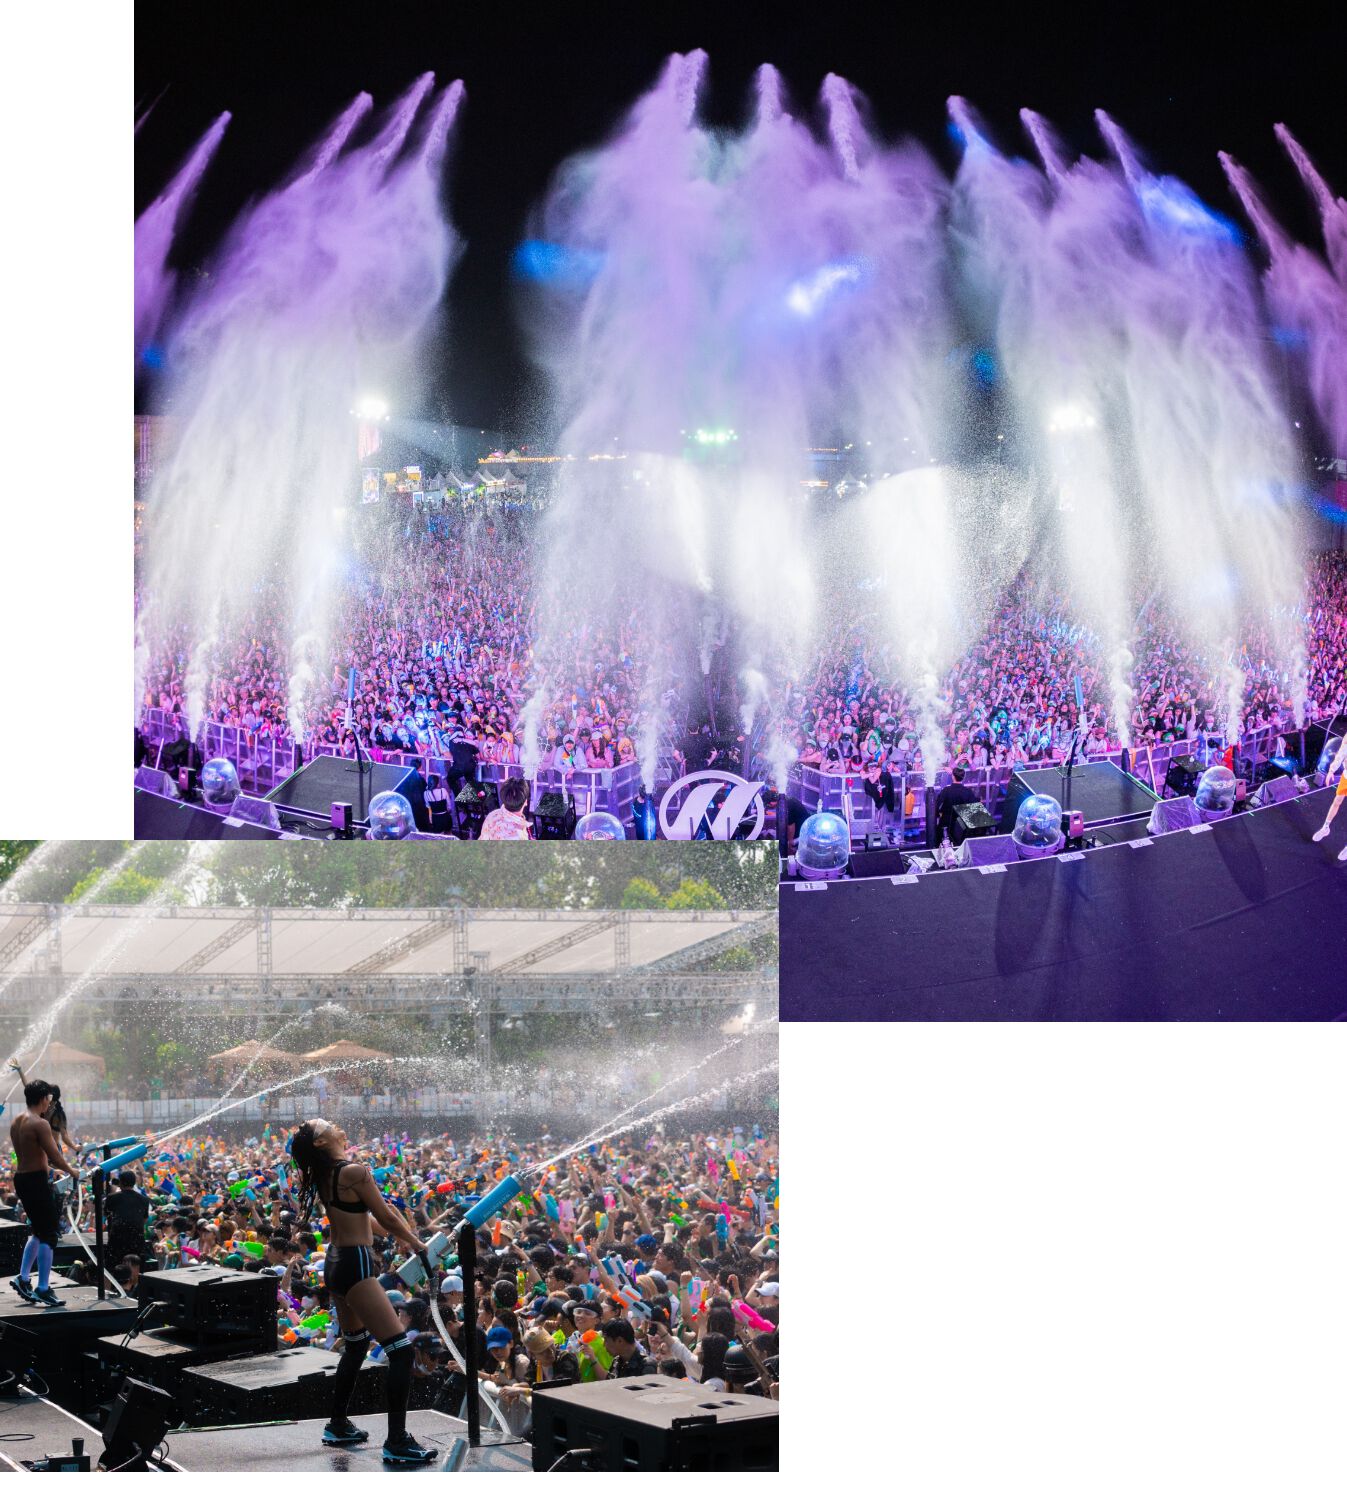 Waterbomb pictures